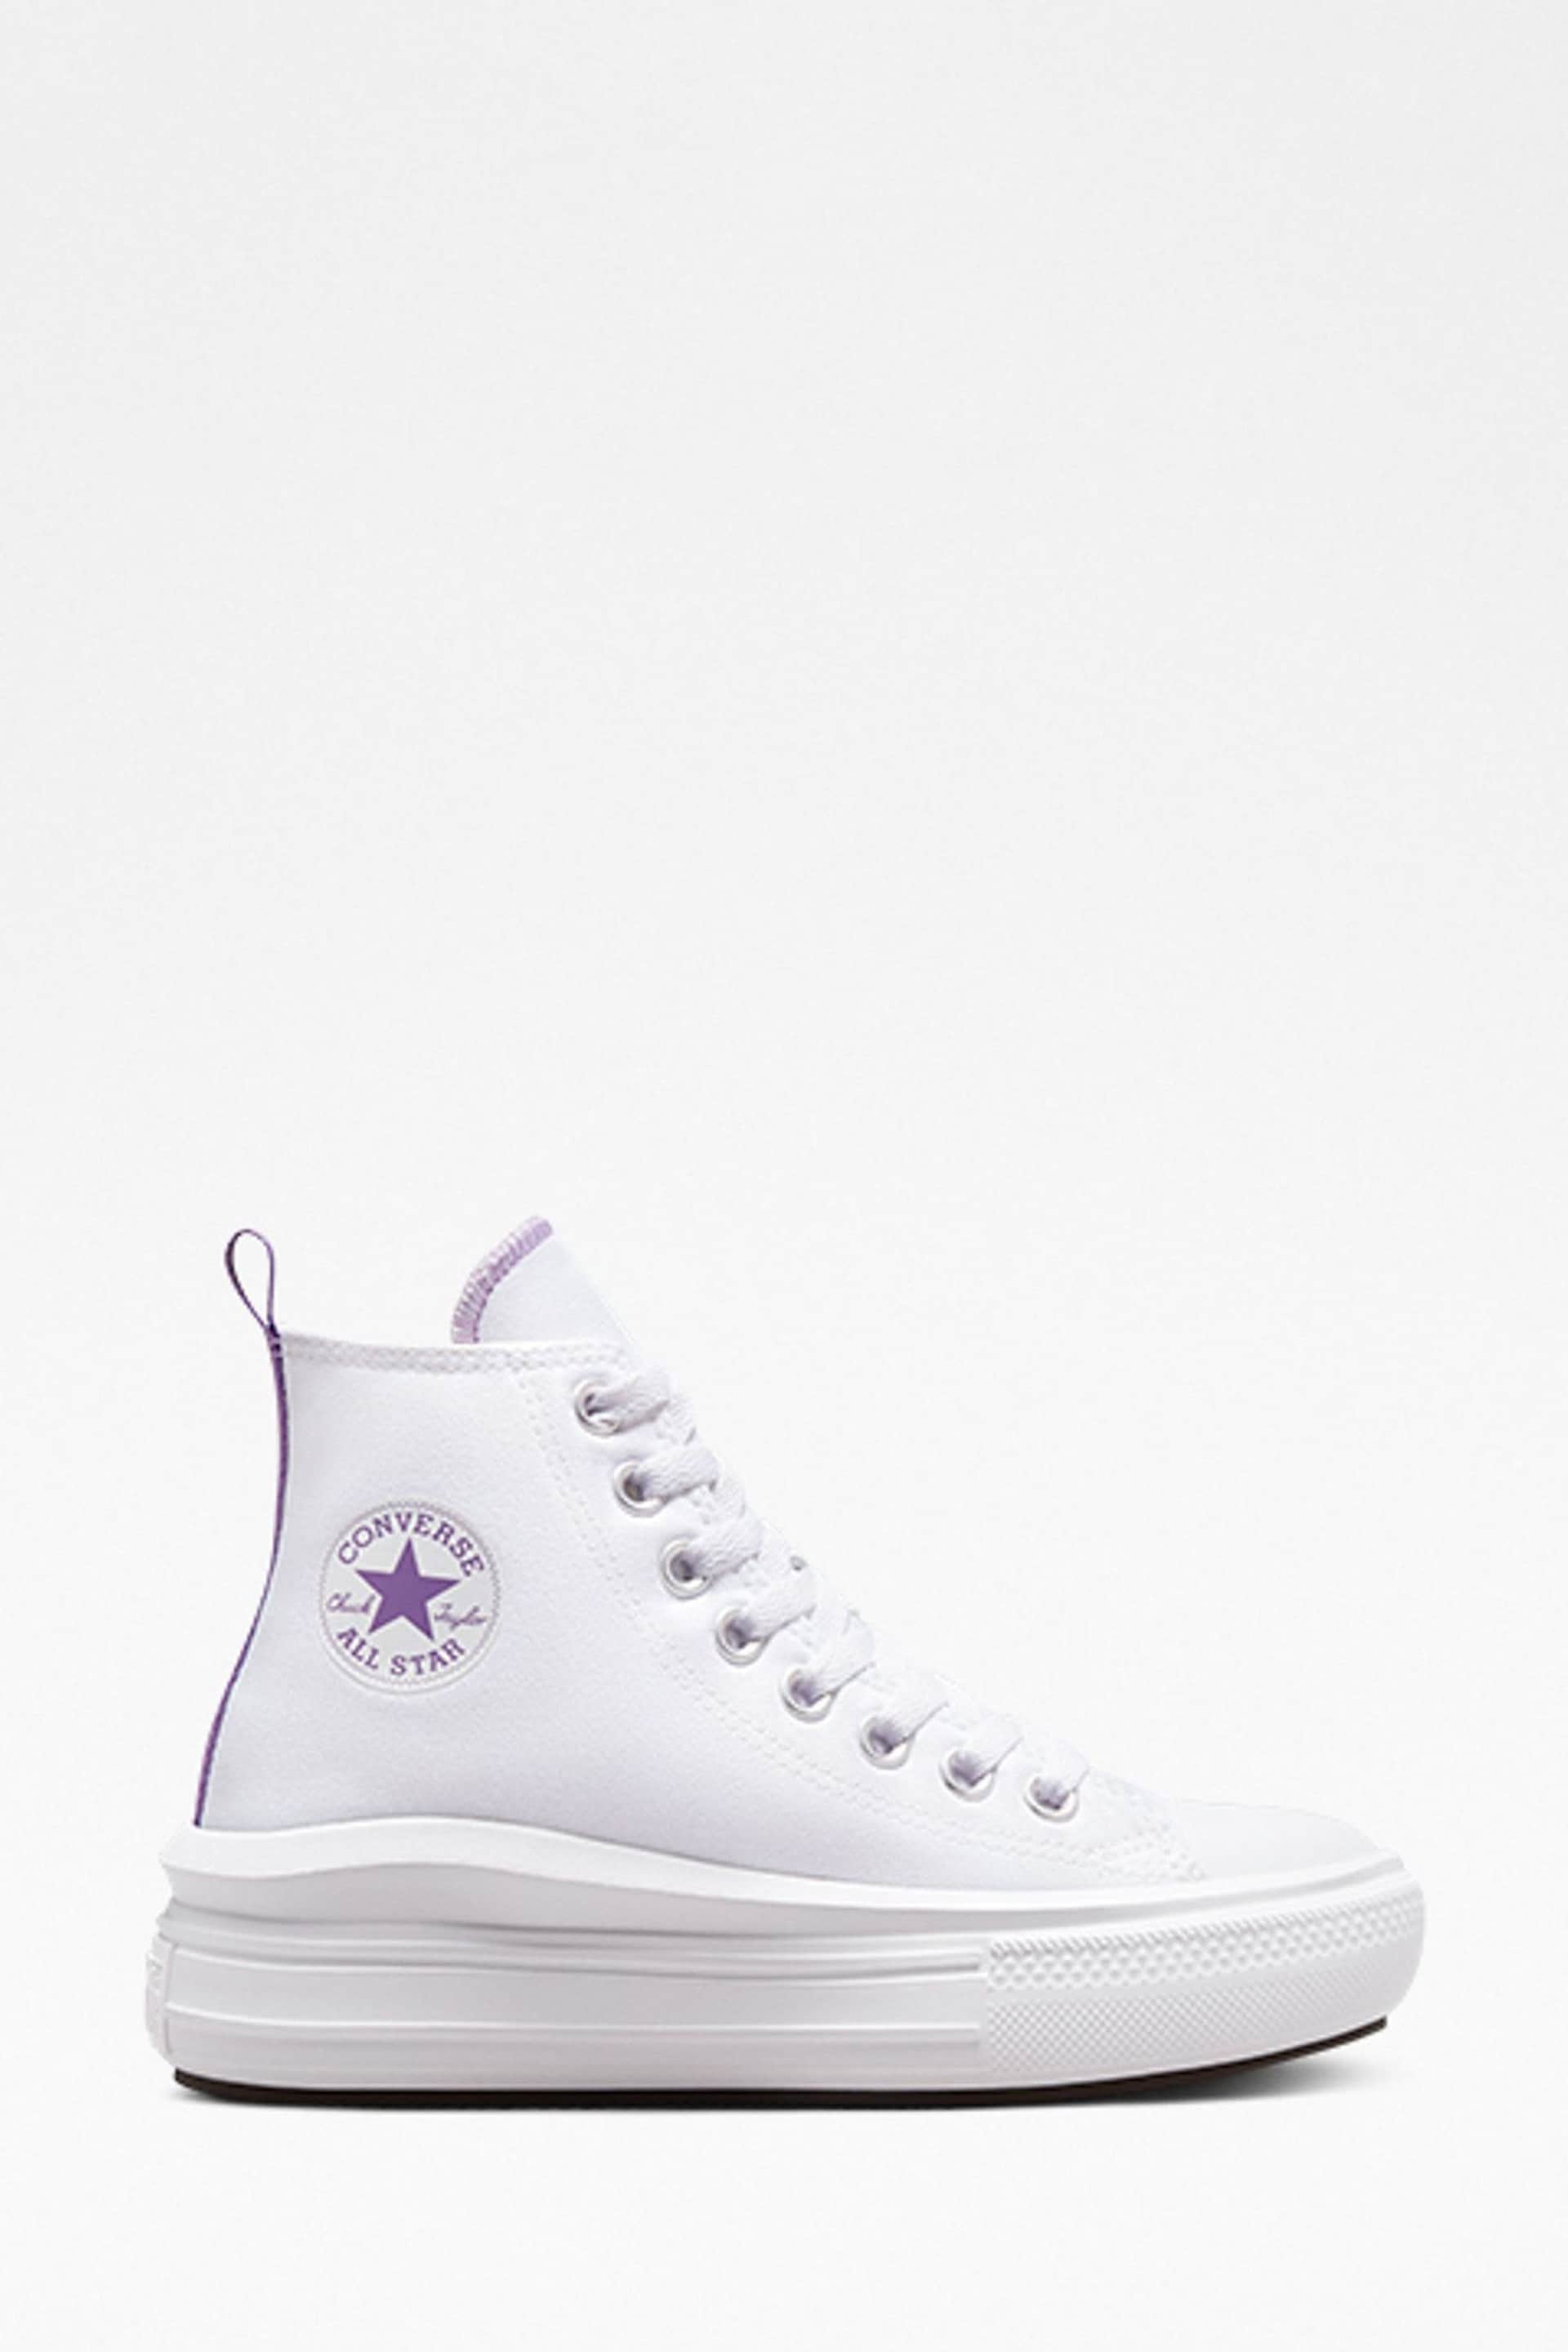 Converse White Move High Top Youth Trainers - Image 1 of 6